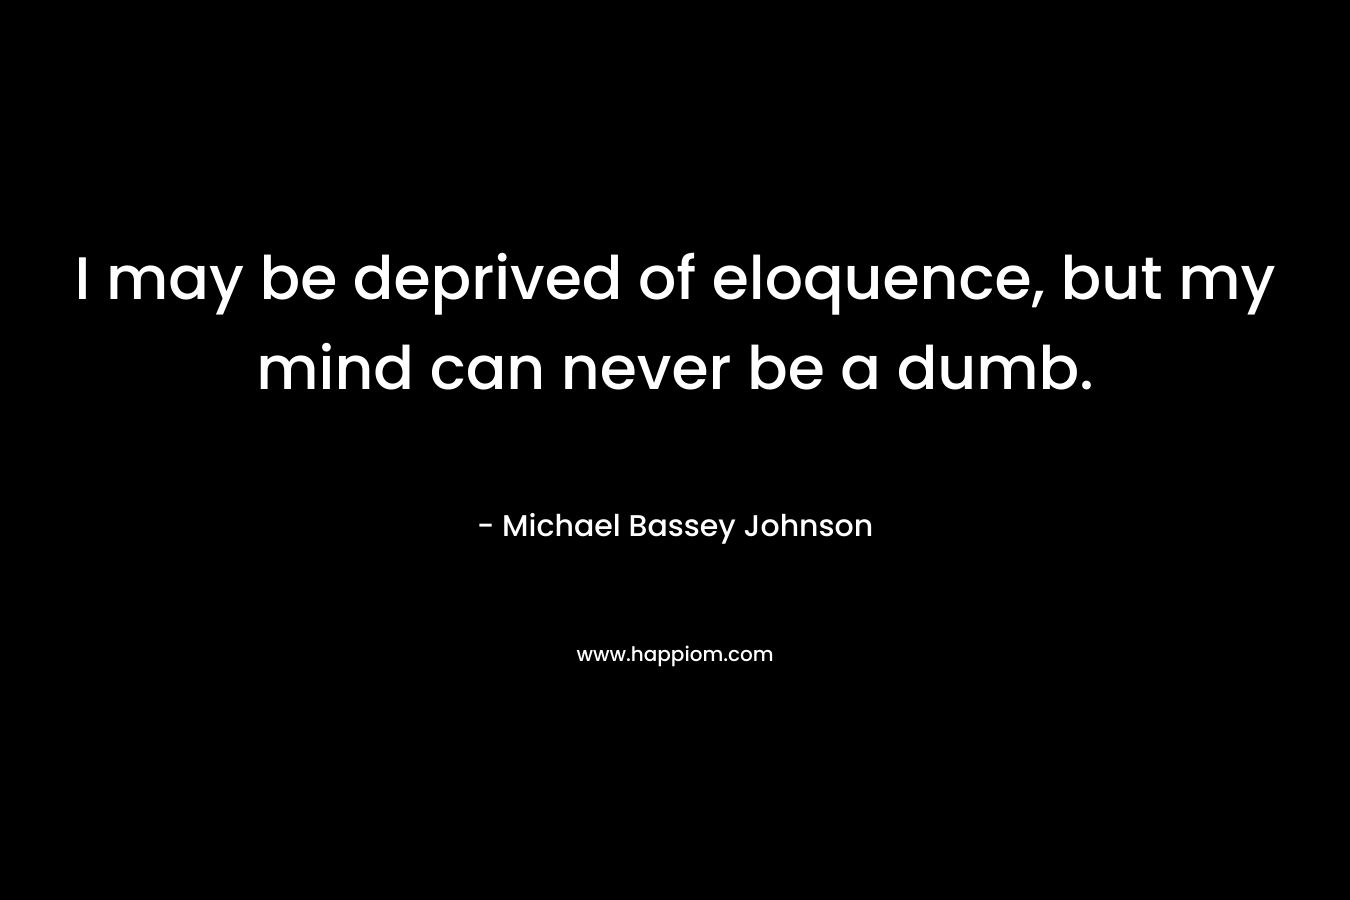 I may be deprived of eloquence, but my mind can never be a dumb.